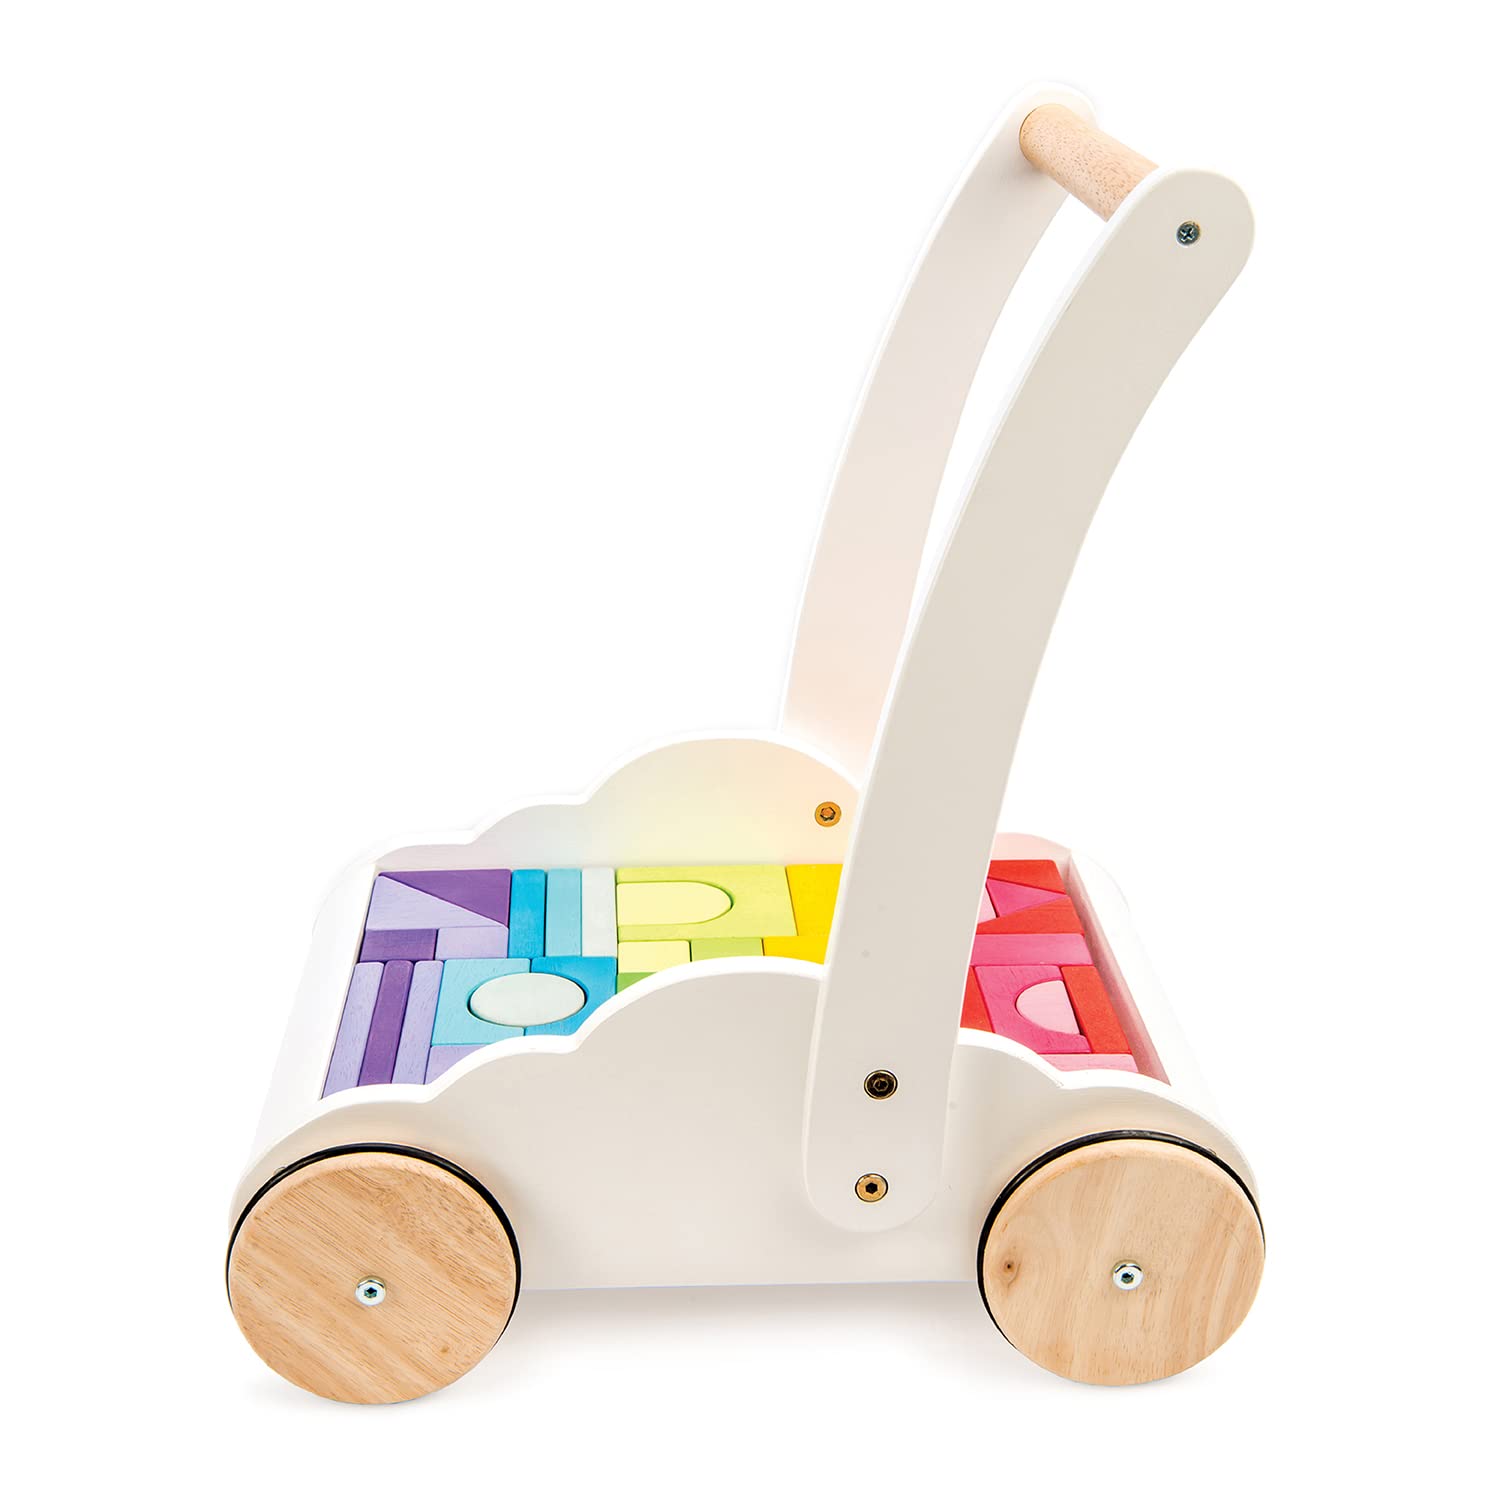 Le Toy Van - Petilou Wooden Walker Toy for Toddlers and Babies | Educational Rainbow Cloud Walker | Suitable for A Boy Or Girl 1 Year Old +, Multi, 45 Blocks (PL102)